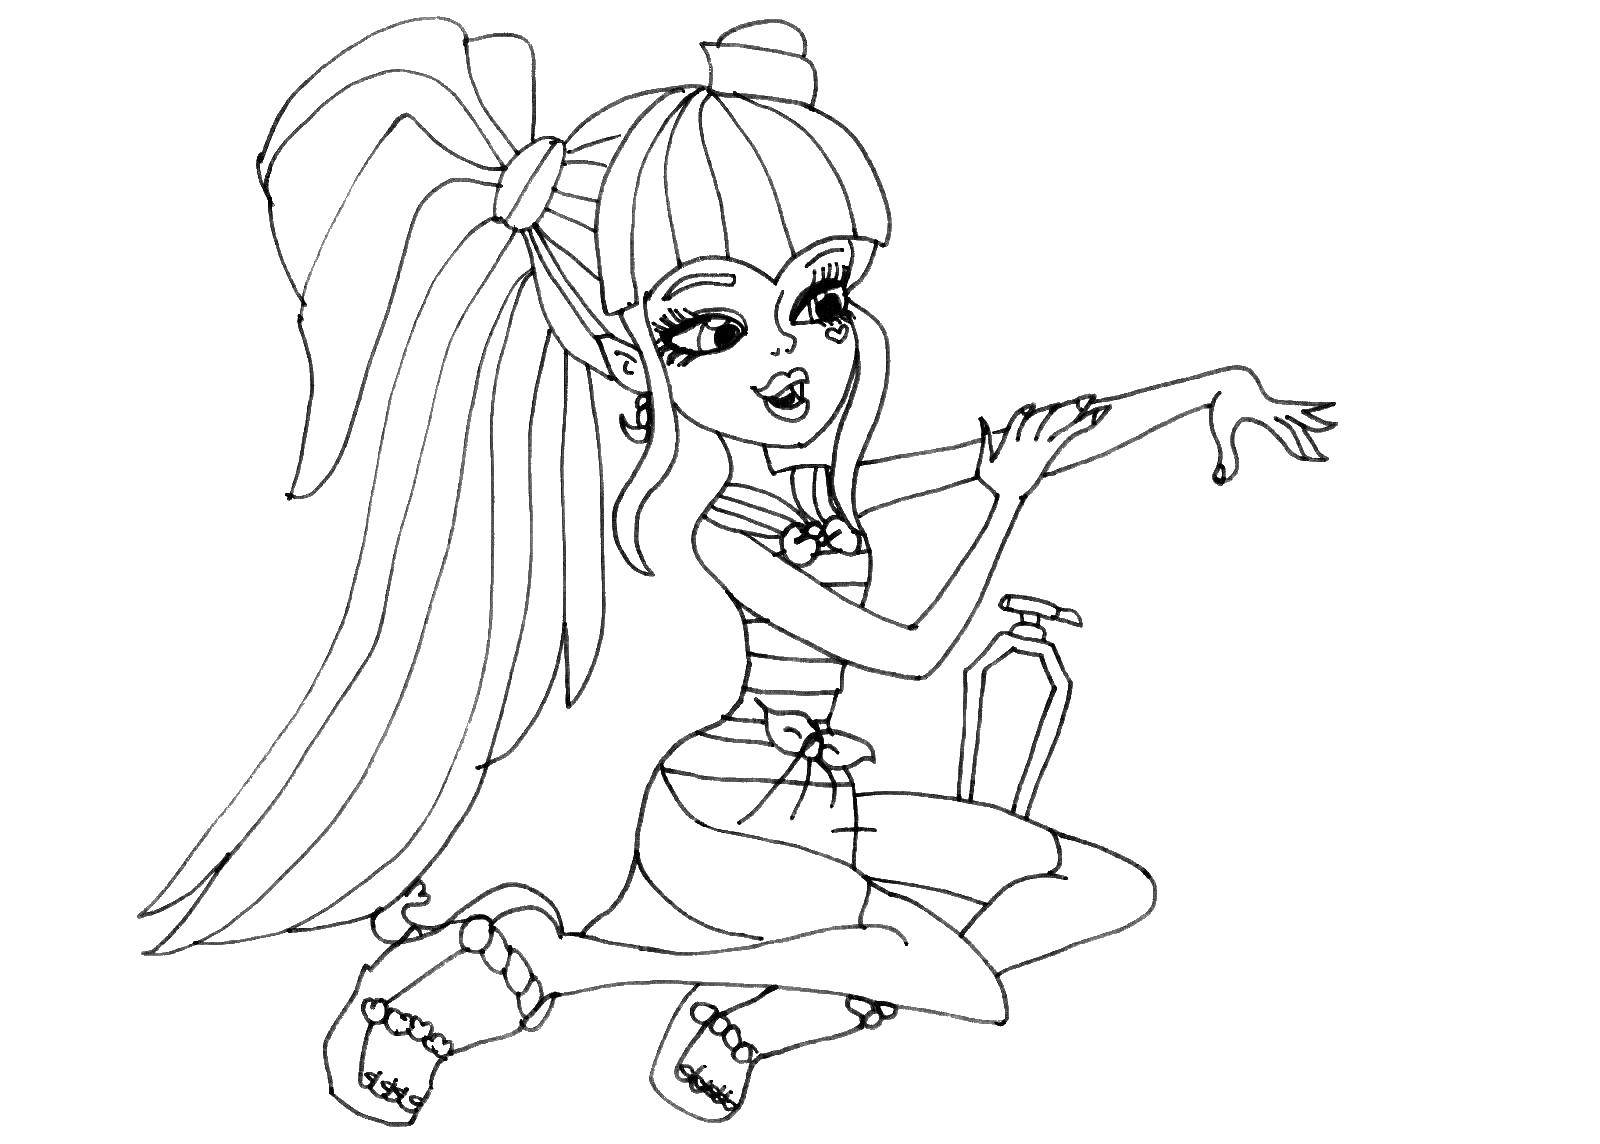 clawdeen monster high coloring pages